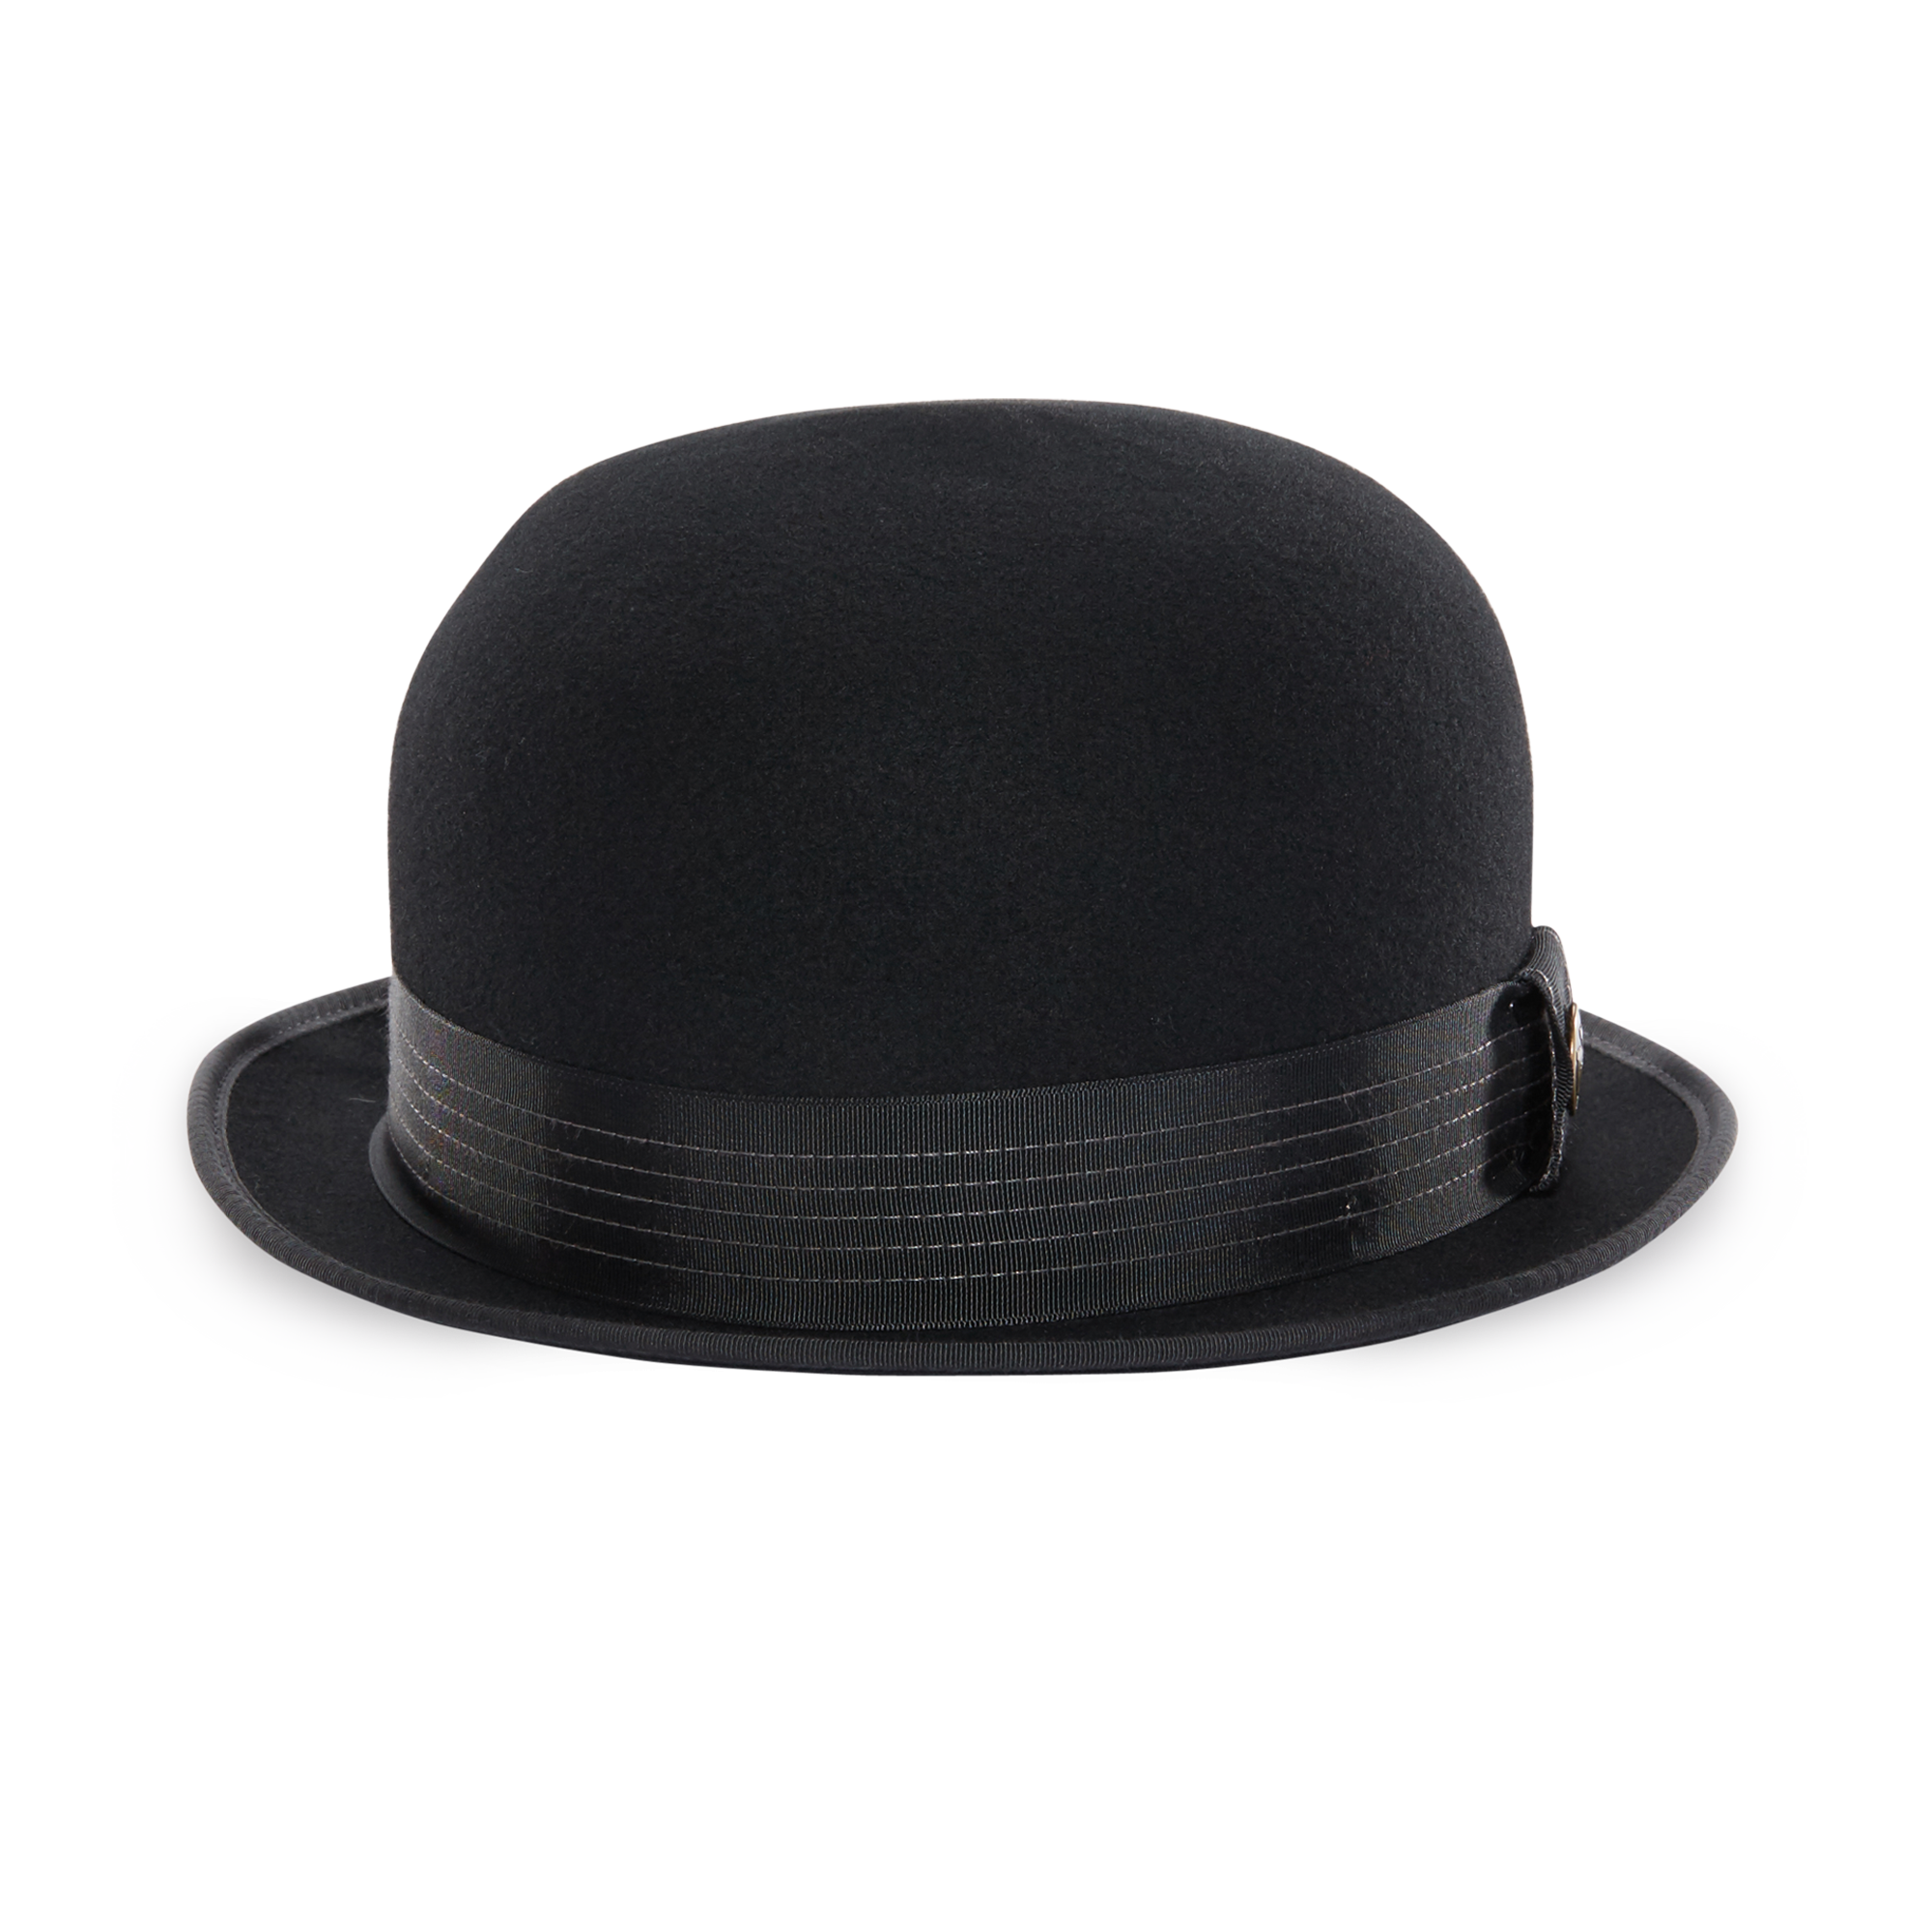 The Mad Hatter Top hat Cap He